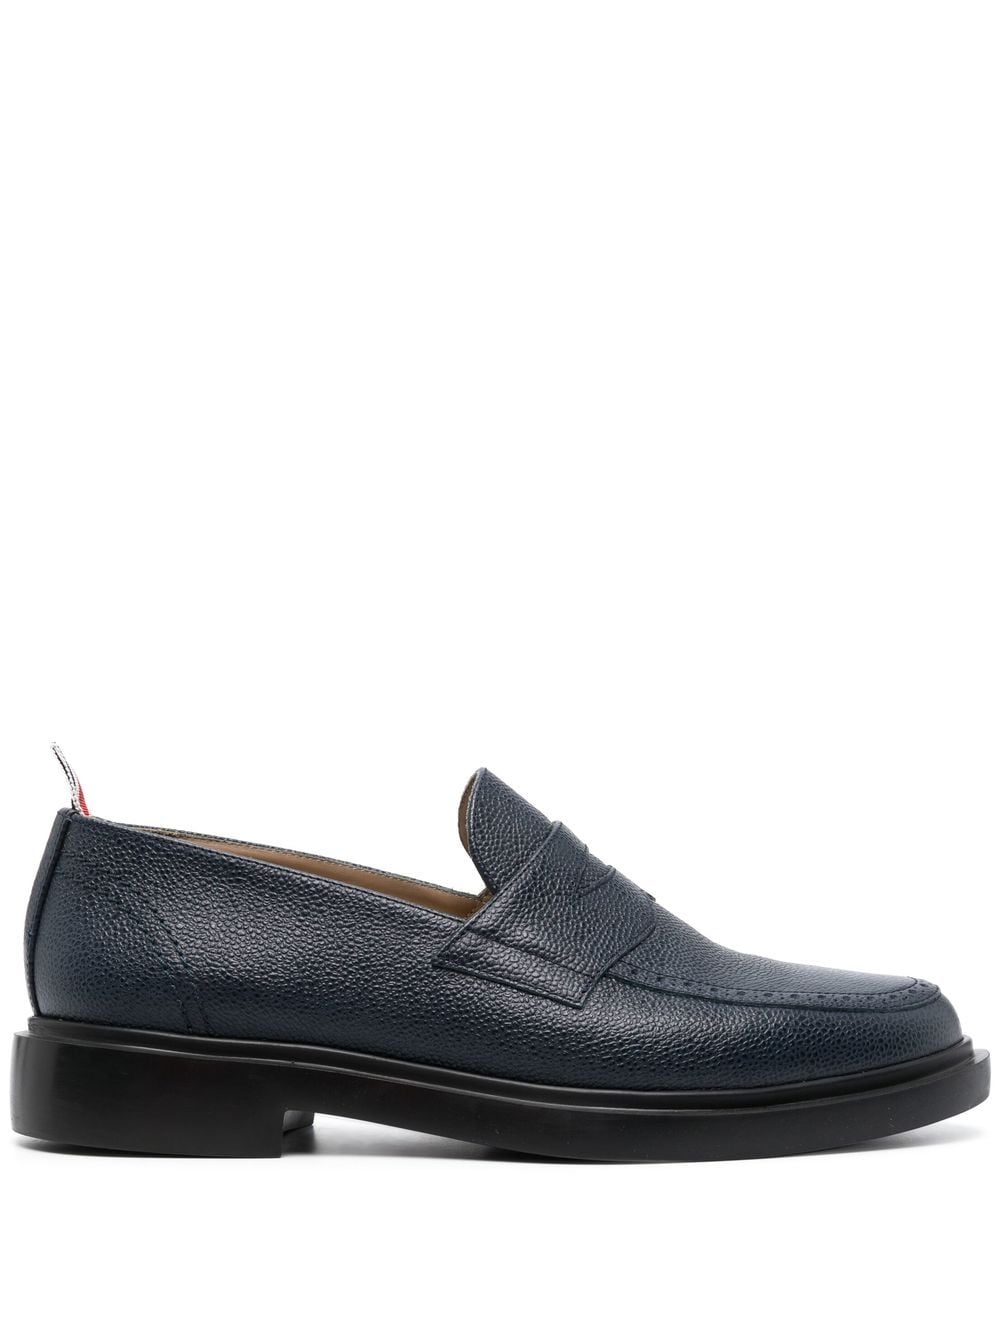 Thom Browne classic penny leather loafers - Blue von Thom Browne